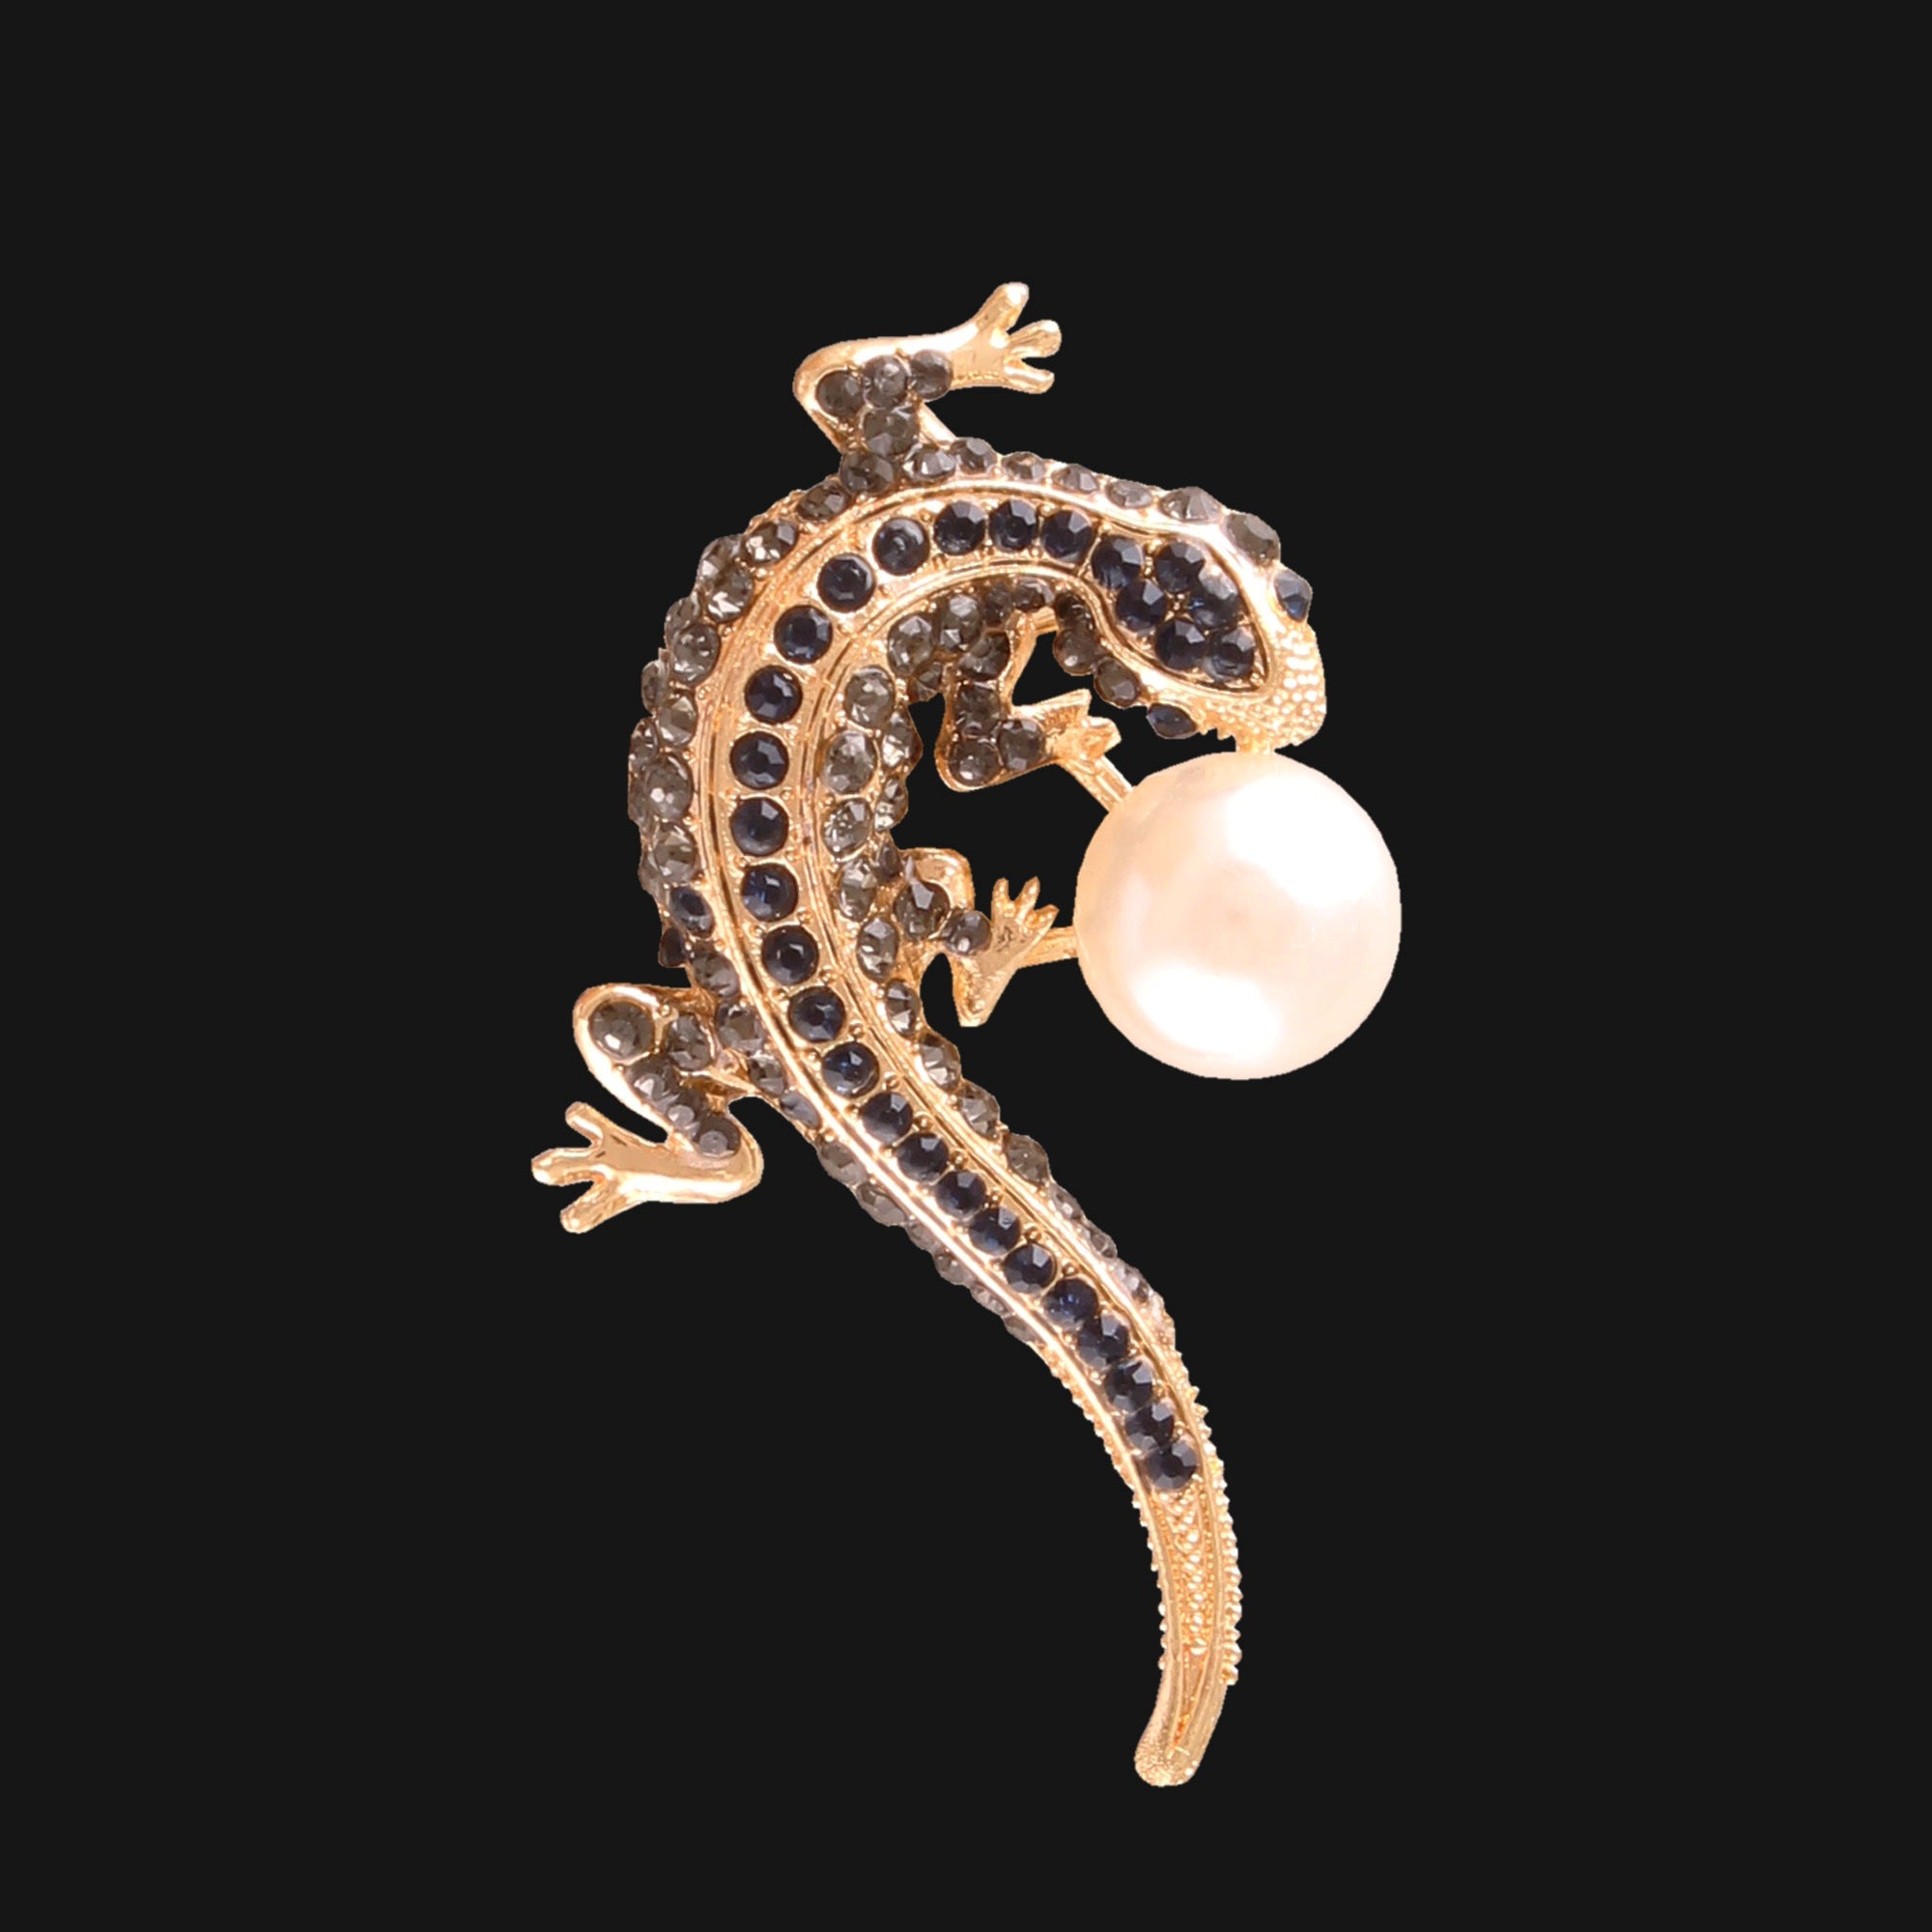 Lizard Design Diamond And Pearl Insect Brooch Pin